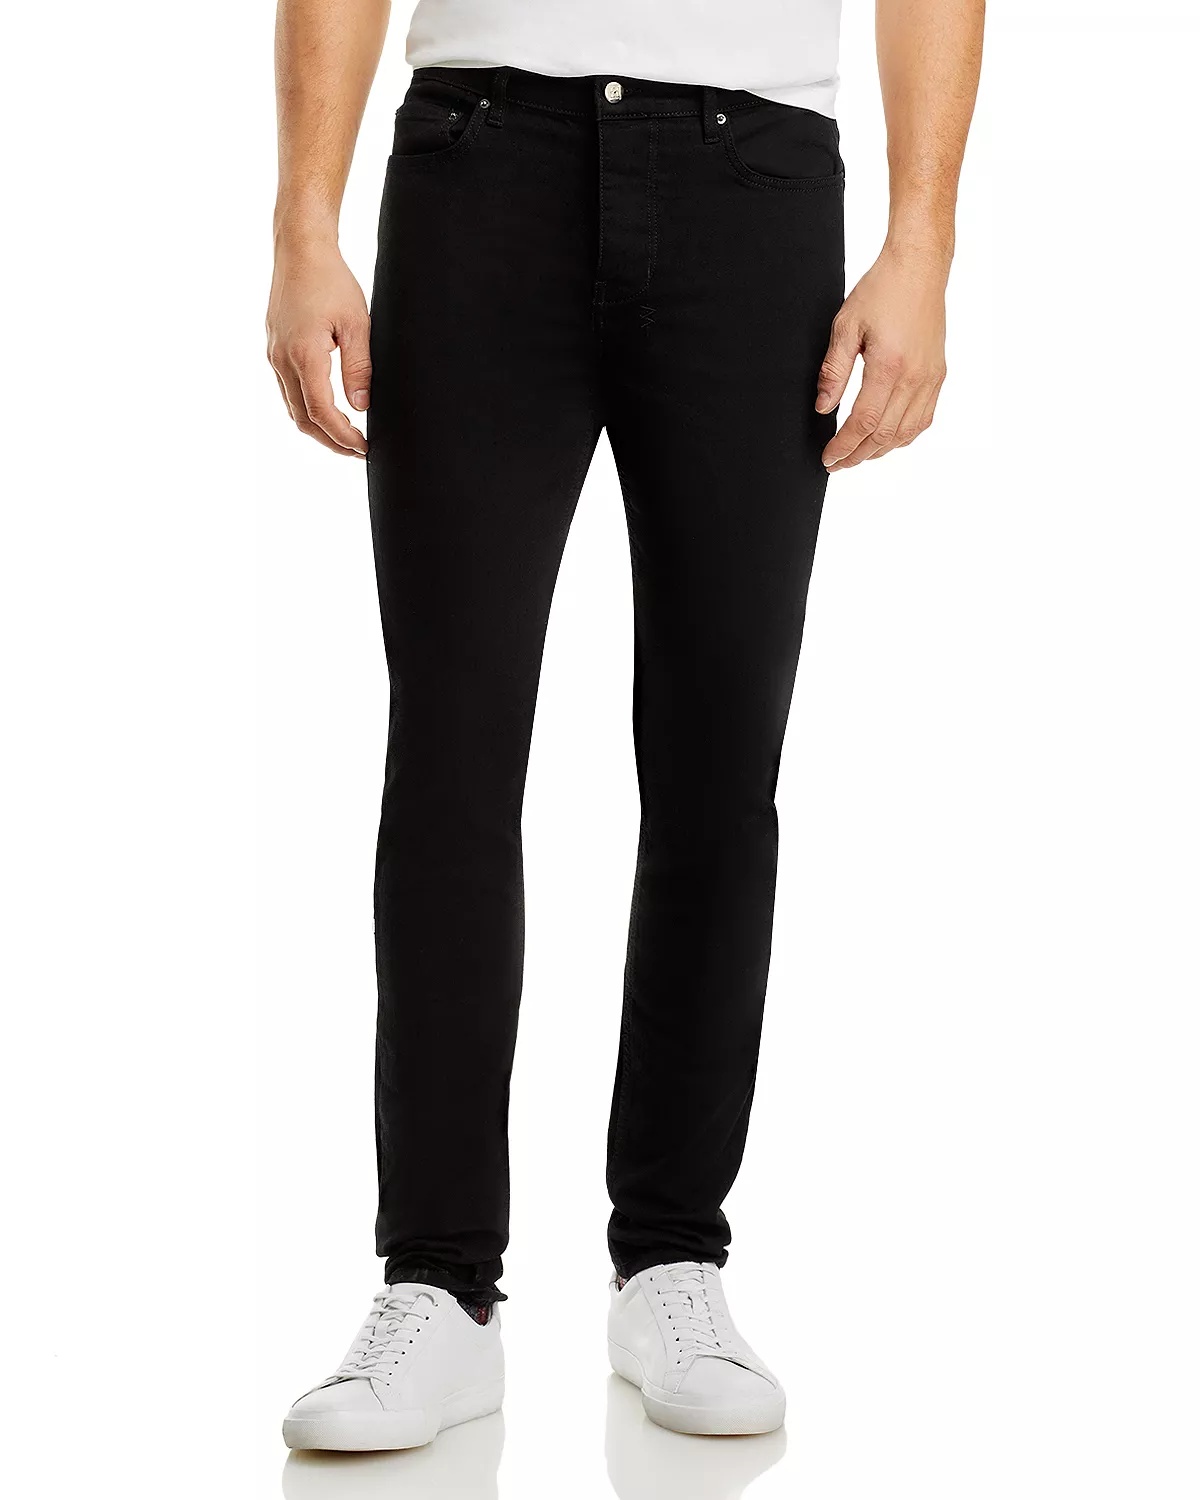 Chitch Slim Fit Jeans in Laid Black - 1